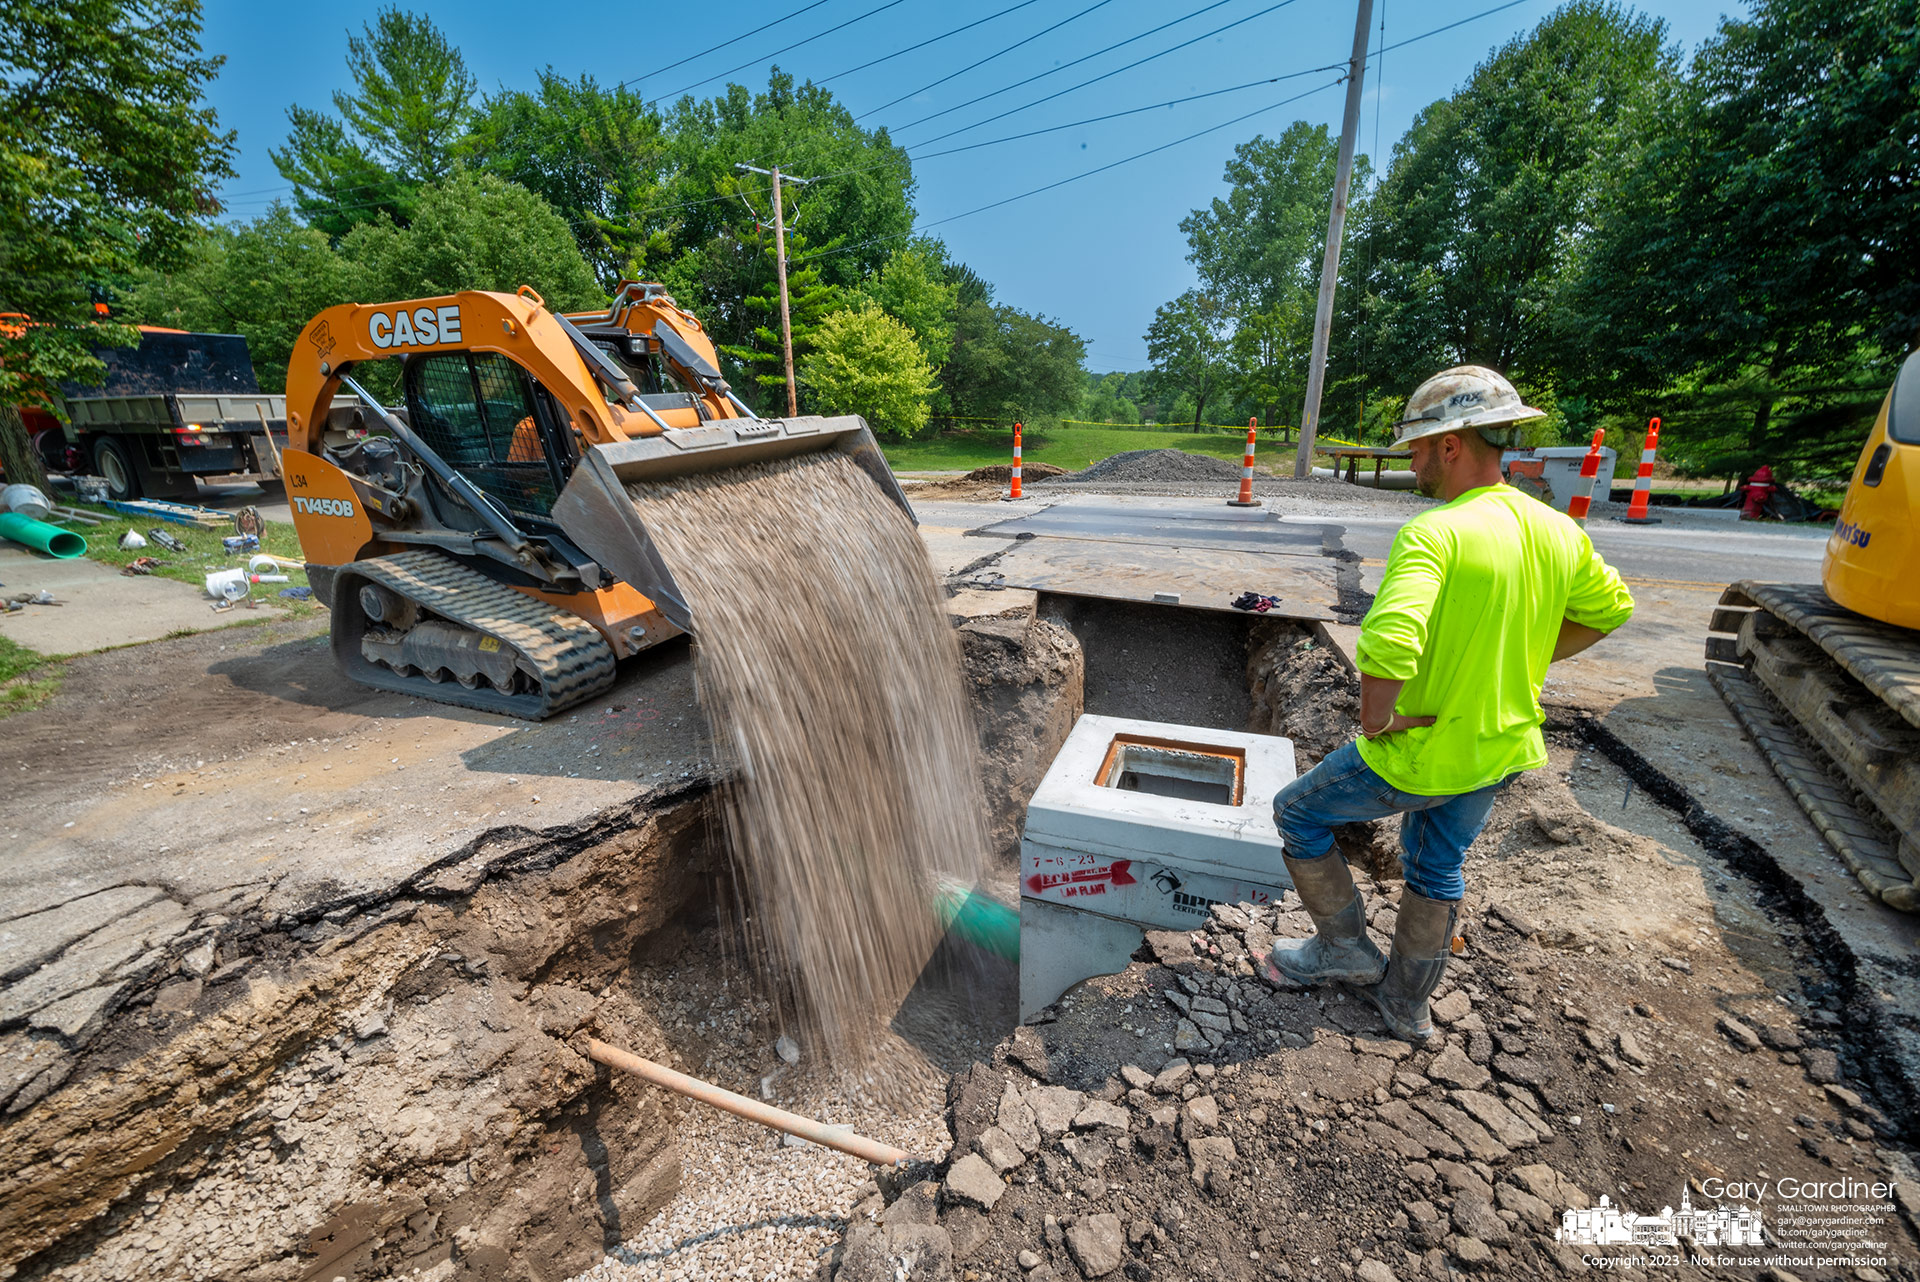 Gravel is poured into the trench where new storm drains connect to a system of drains that will move water from flooded sections of East Walnut Street to the wetlands at Highland Park. My Final Photo for August 2, 2023.